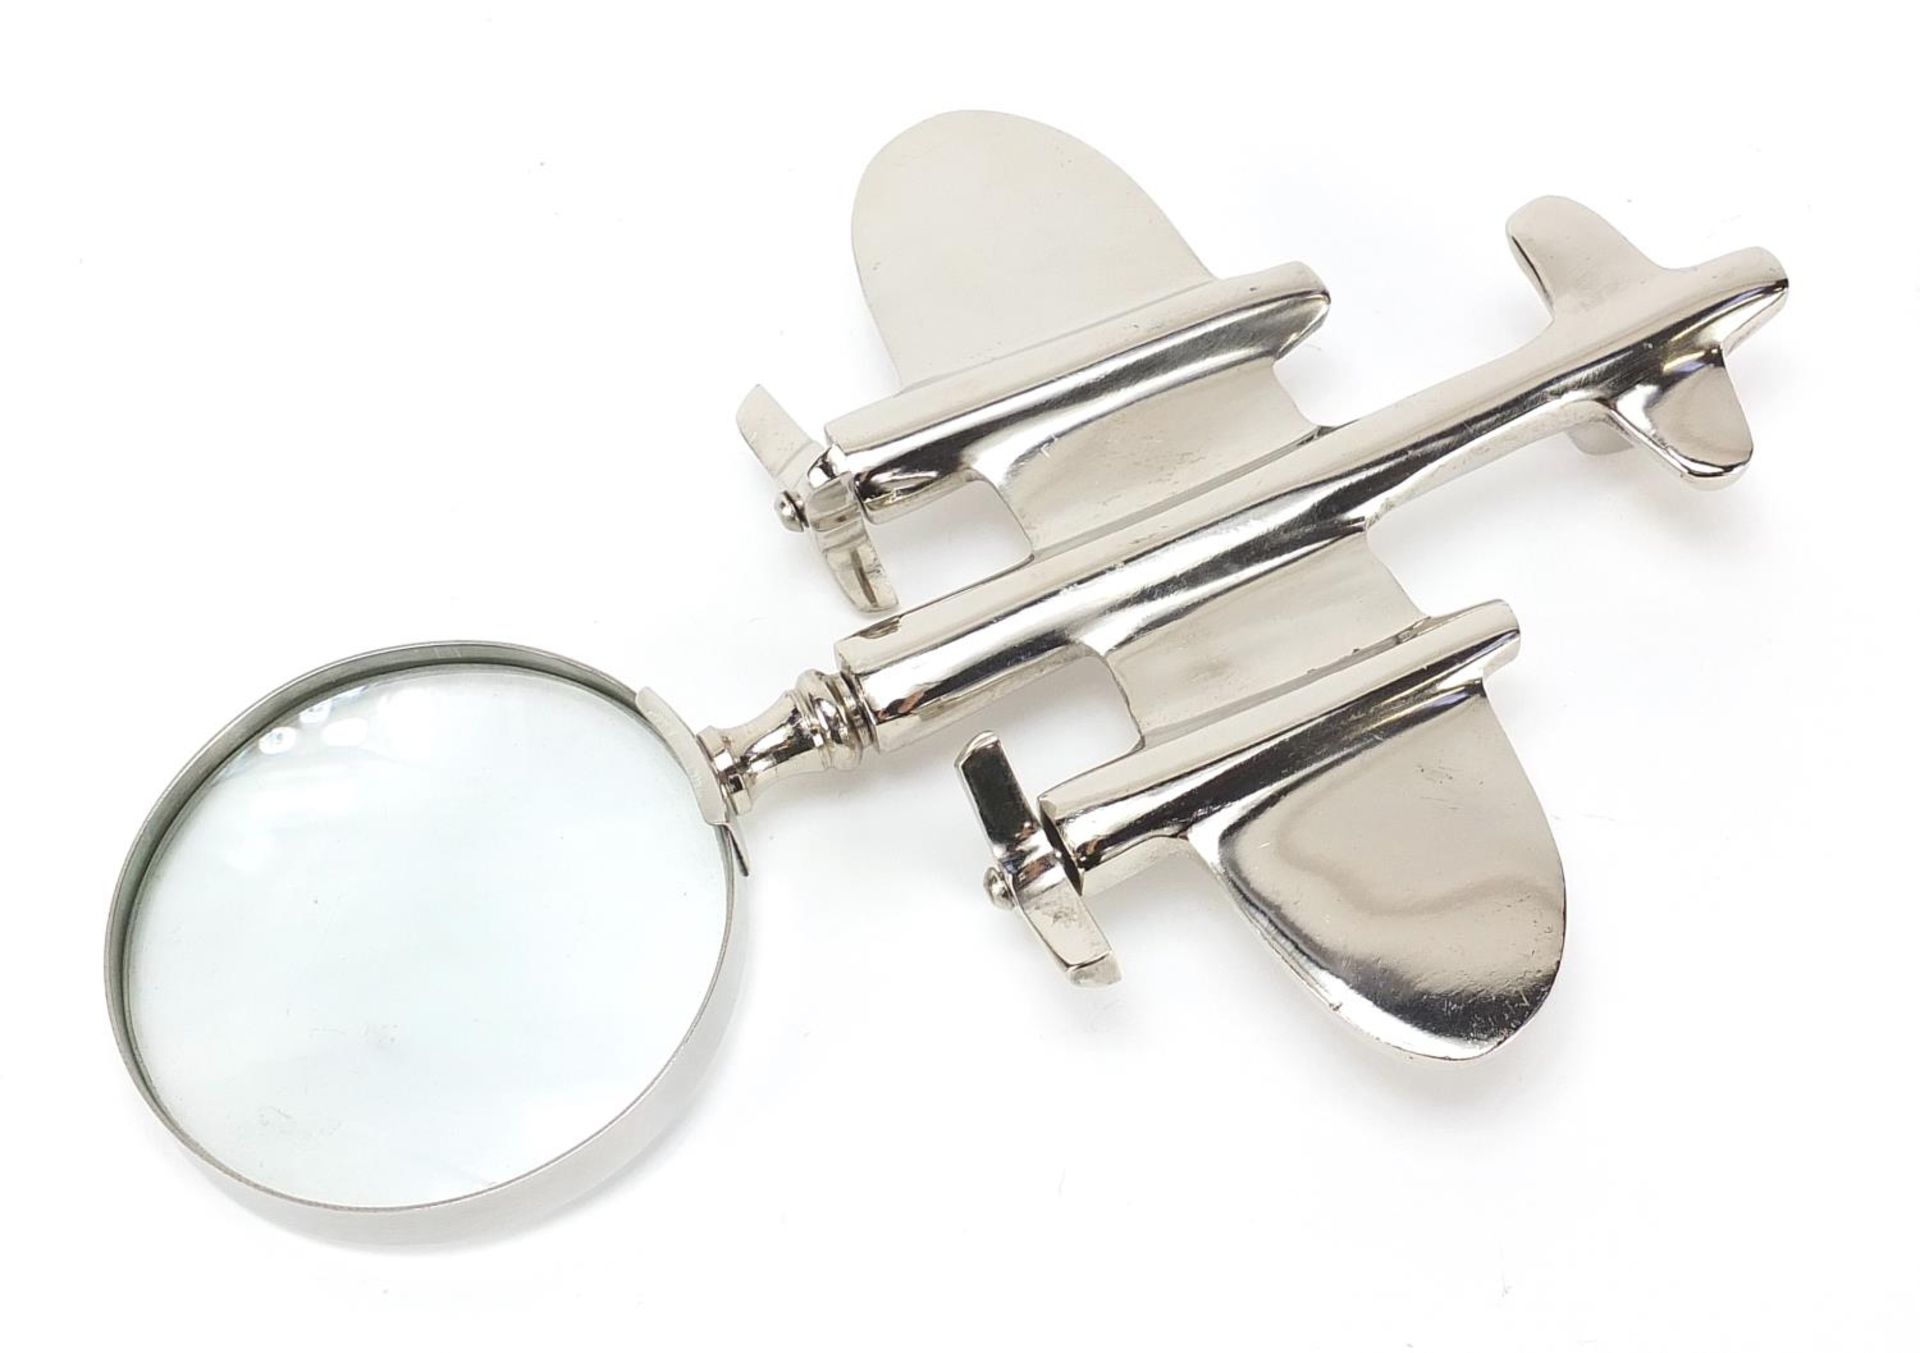 Novelty silver plated magnifying glass in the form of an aeroplane, 23.5cm in length - Image 2 of 2